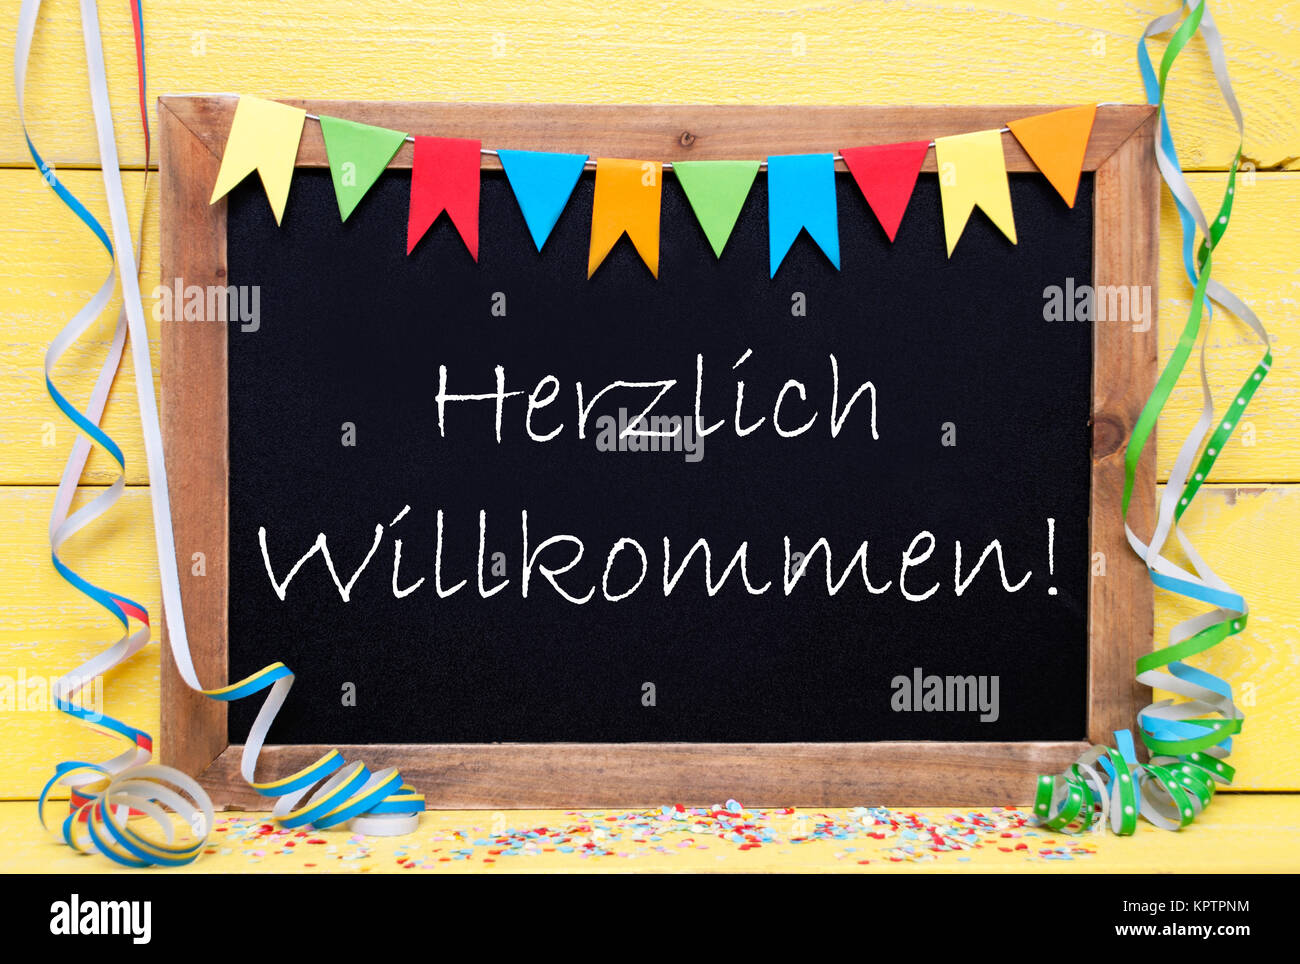 Chalkboard With German Text Herzlich Willkommen Means Welcome. Party  Decoration Like Streamer, Confetti And Bunting Flags. Yellow Wooden  Background With Vintage, Retro Or Rustic Syle Stock Photo - Alamy